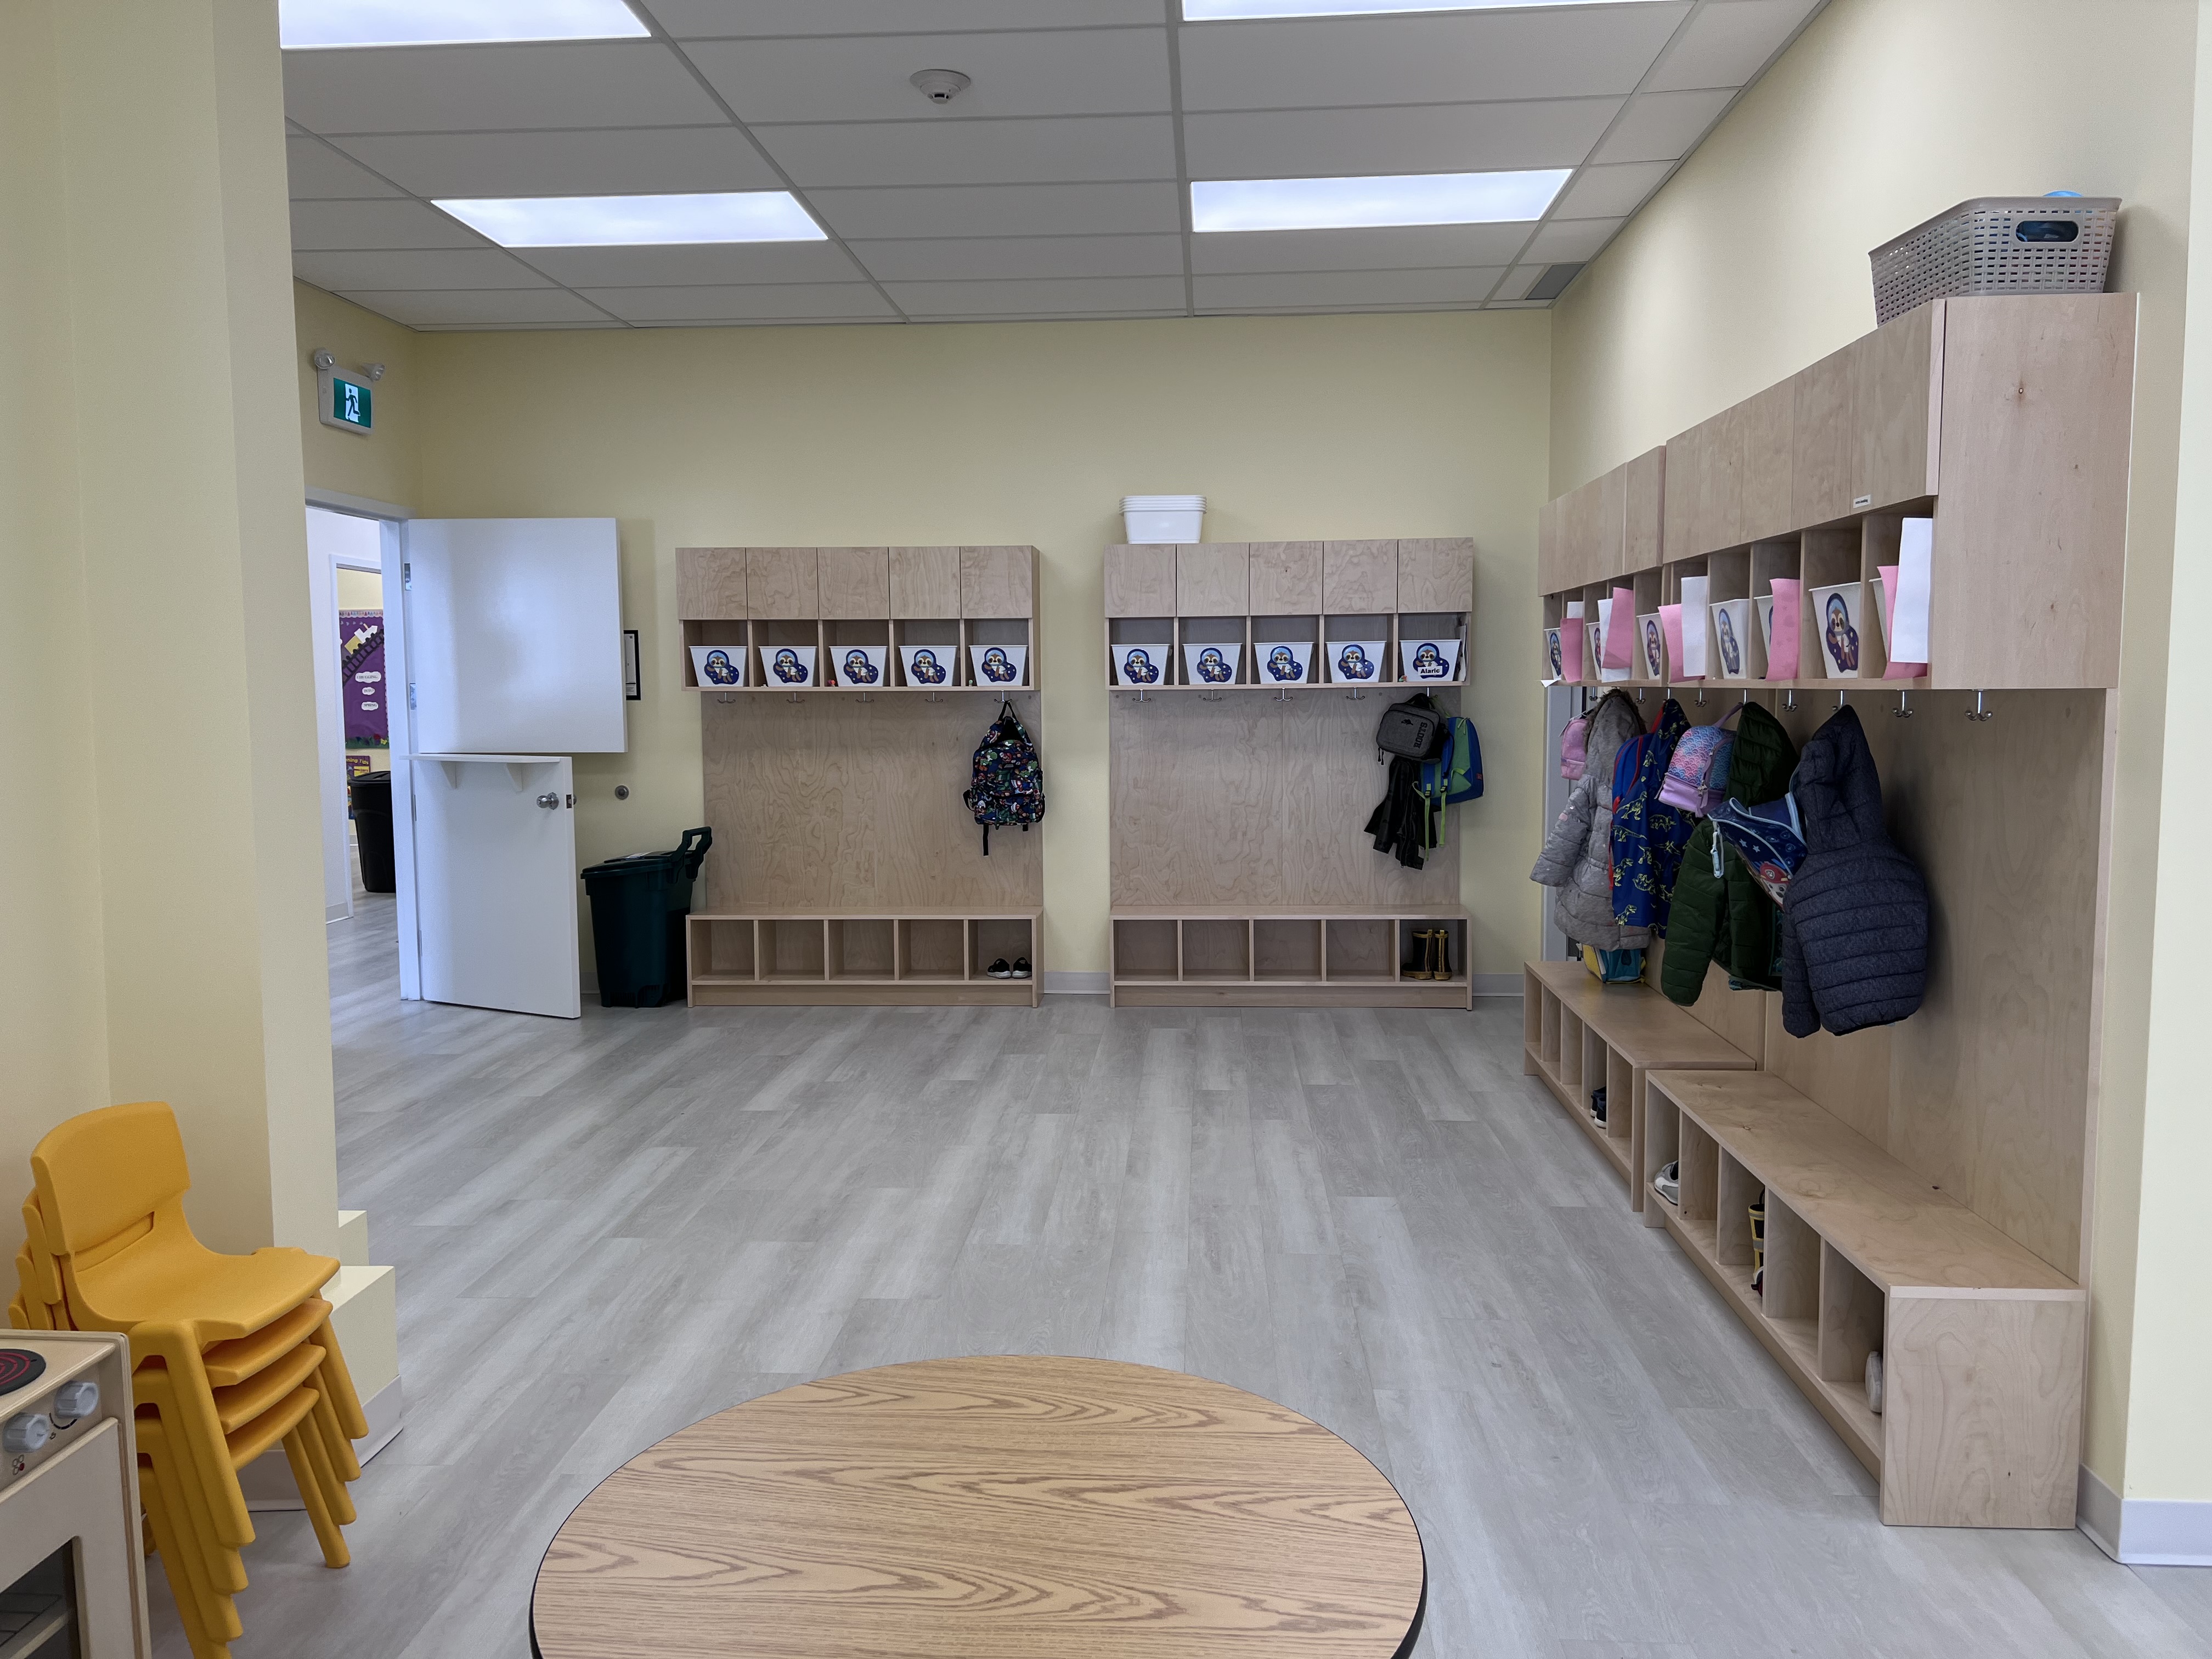 Local Childcare Buildings In Burnaby And Vancouver